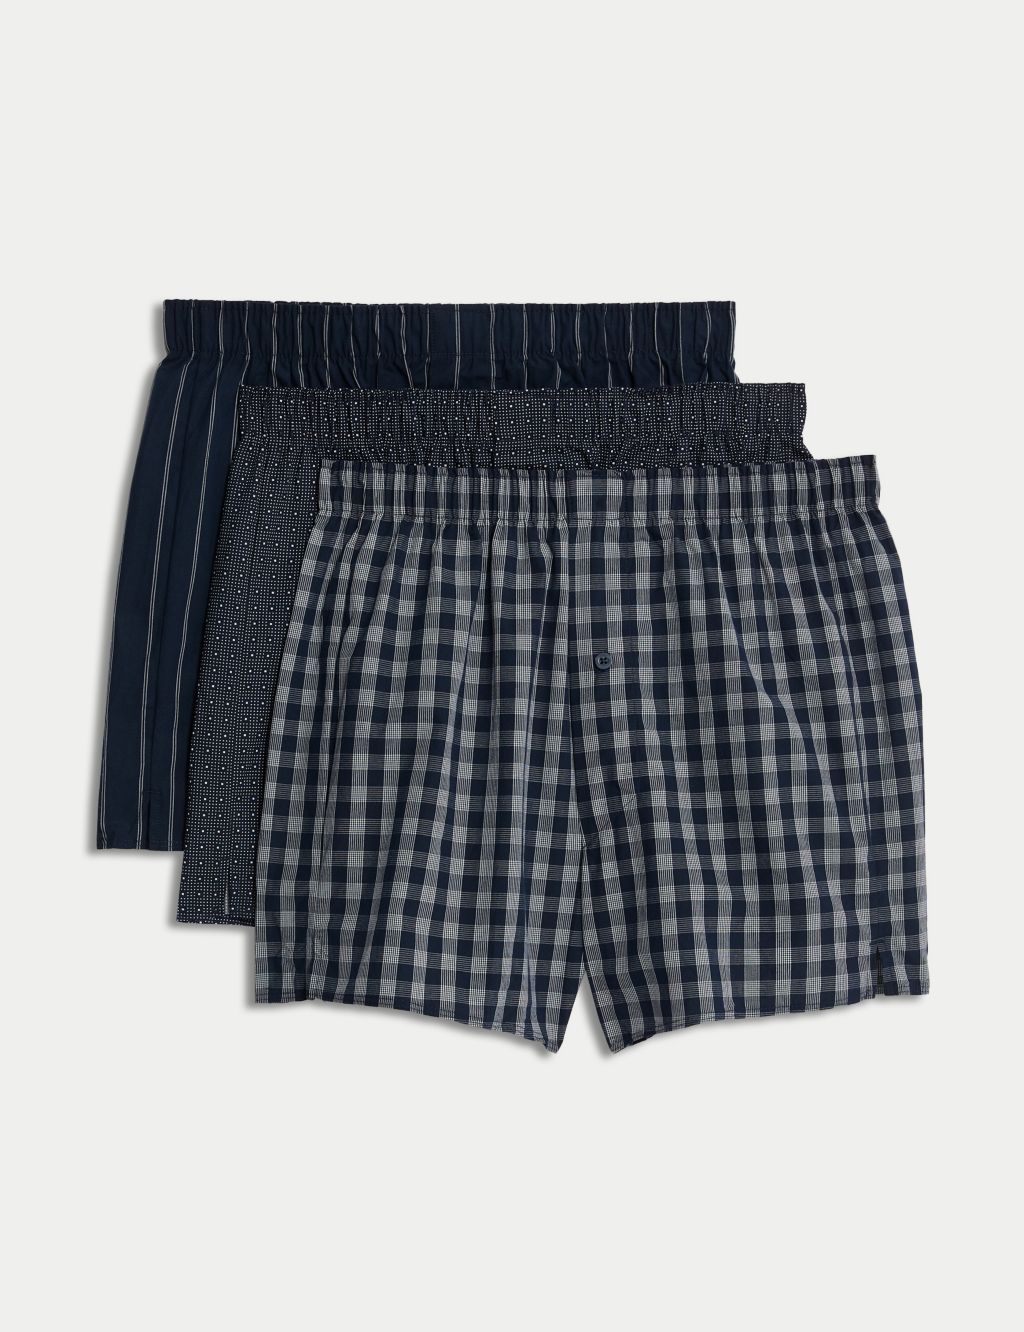 3pk Pure Cotton Assorted Woven Boxers image 1